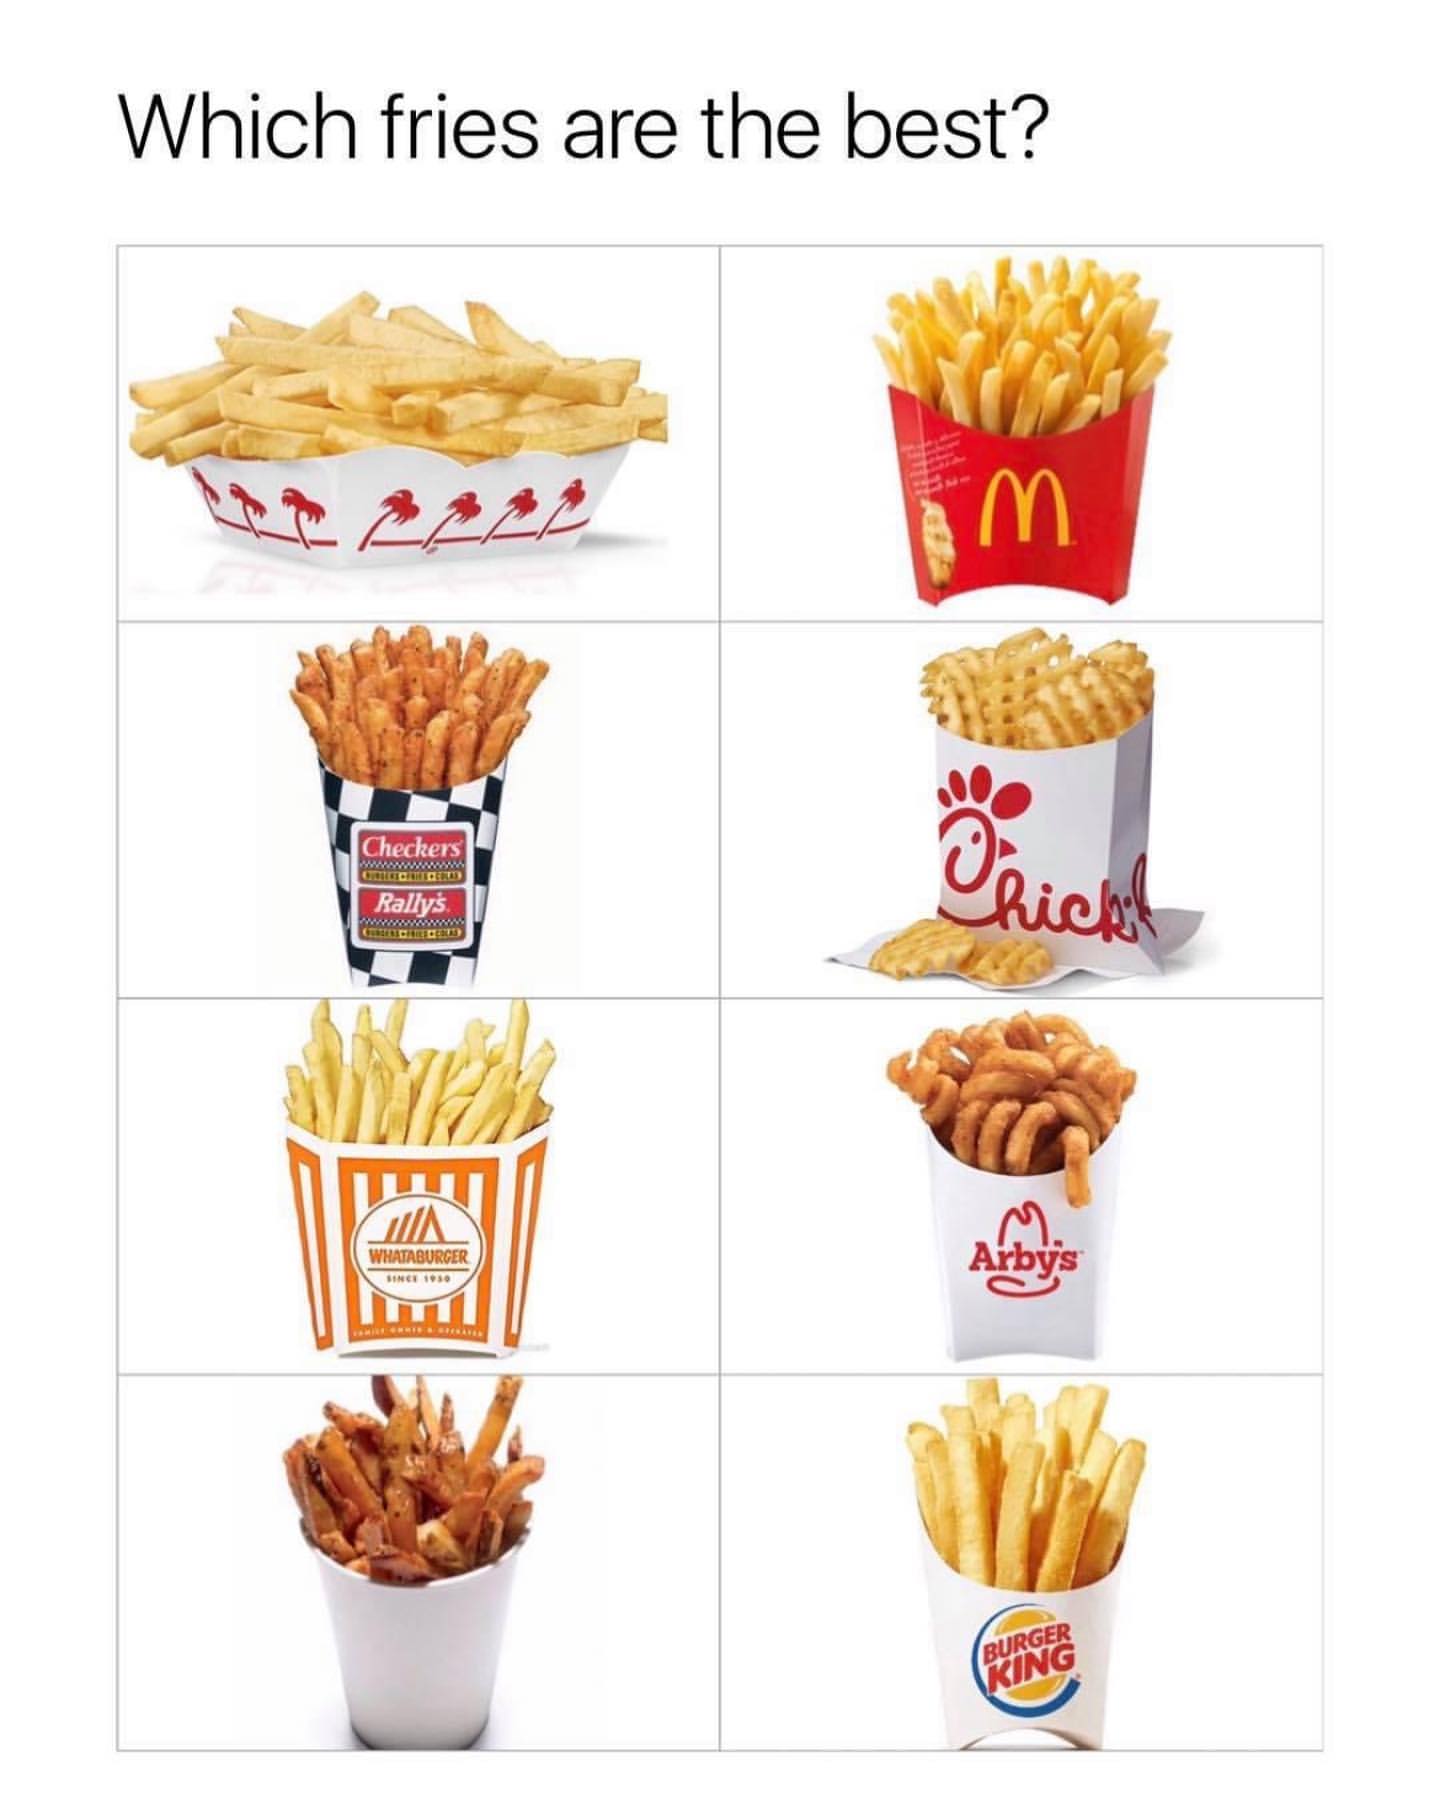 Which fries are the best?